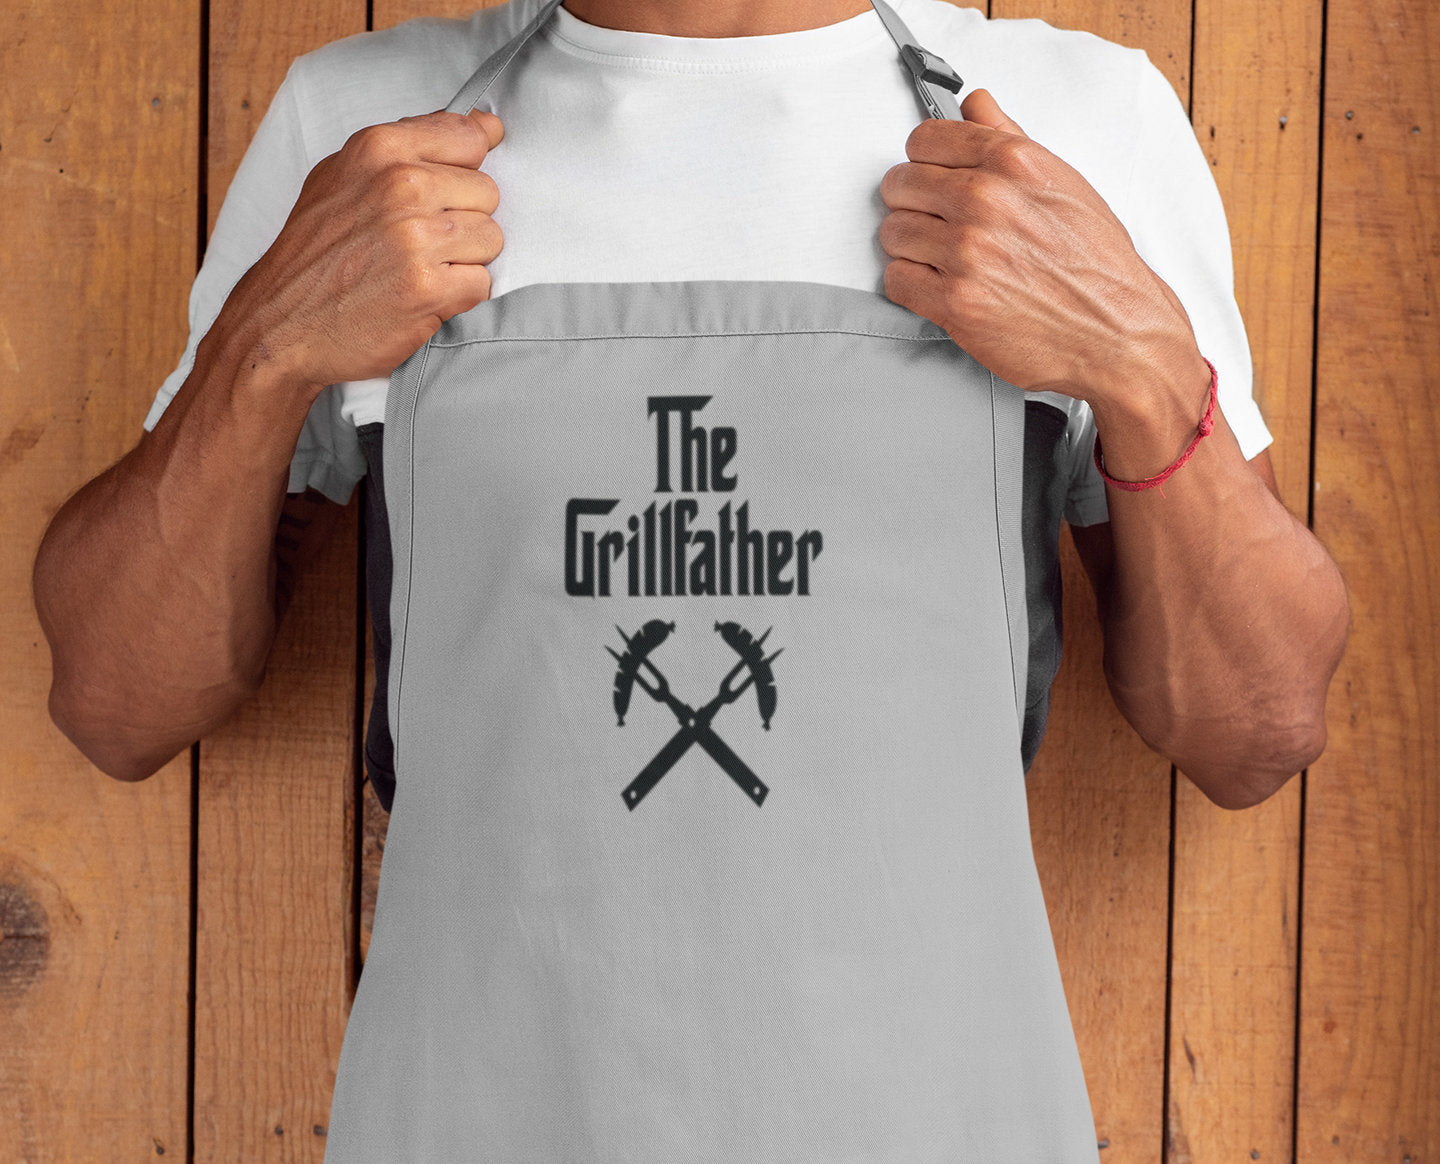 The Grillfather BBQ Apron